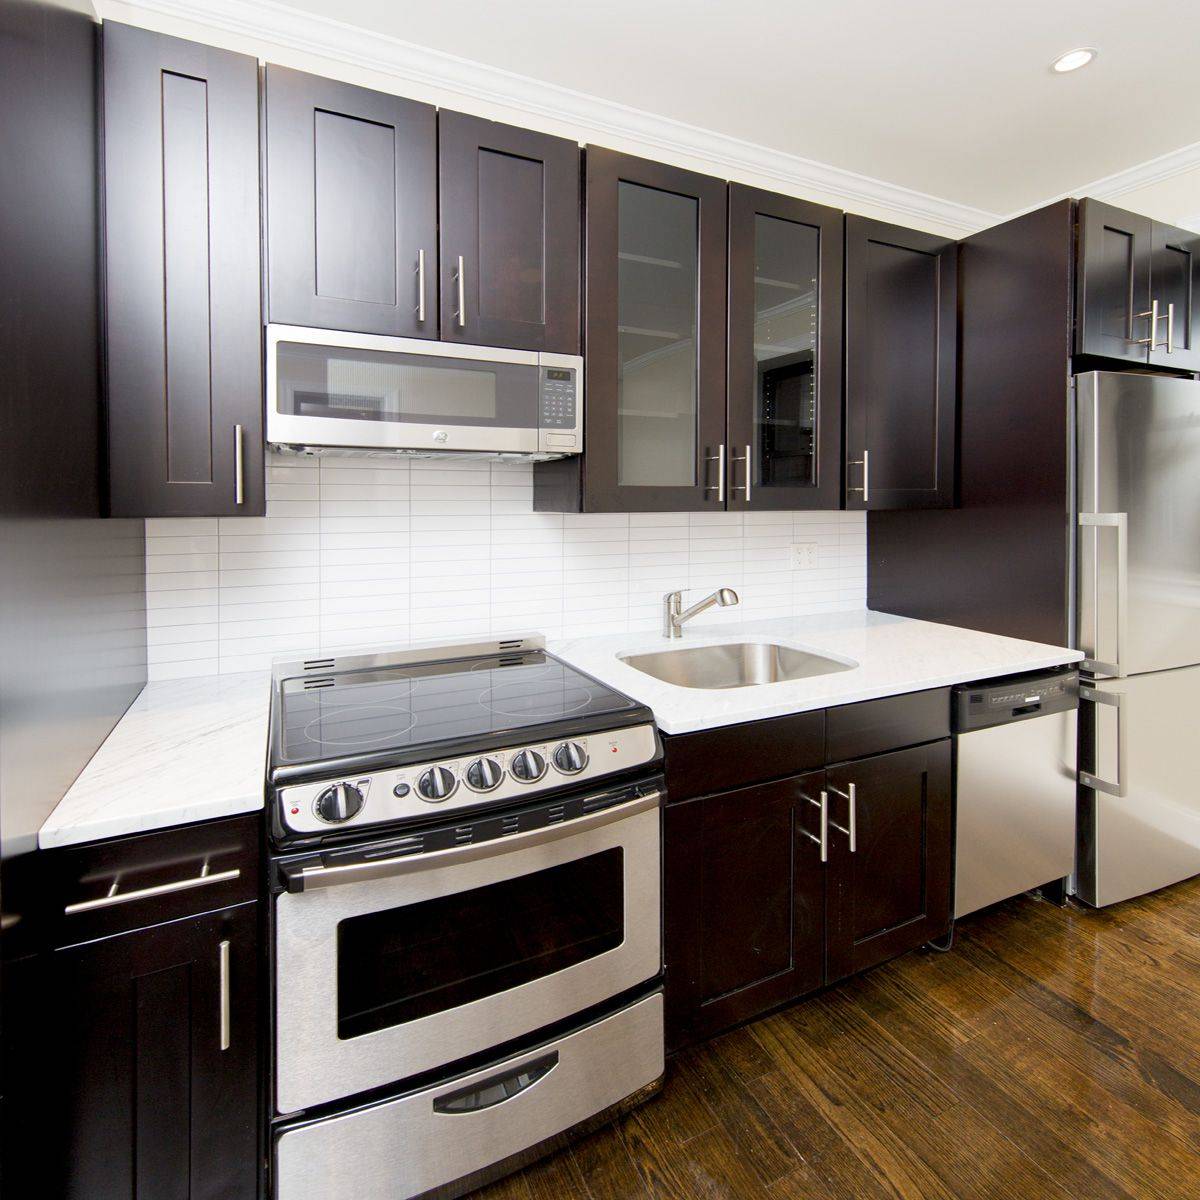 CLOSE TO CENTRAL PARK...BEAUTIFUL UPPER EAST SIDE...NO FEE...2BD 1BATH...W/D IN-UNIT